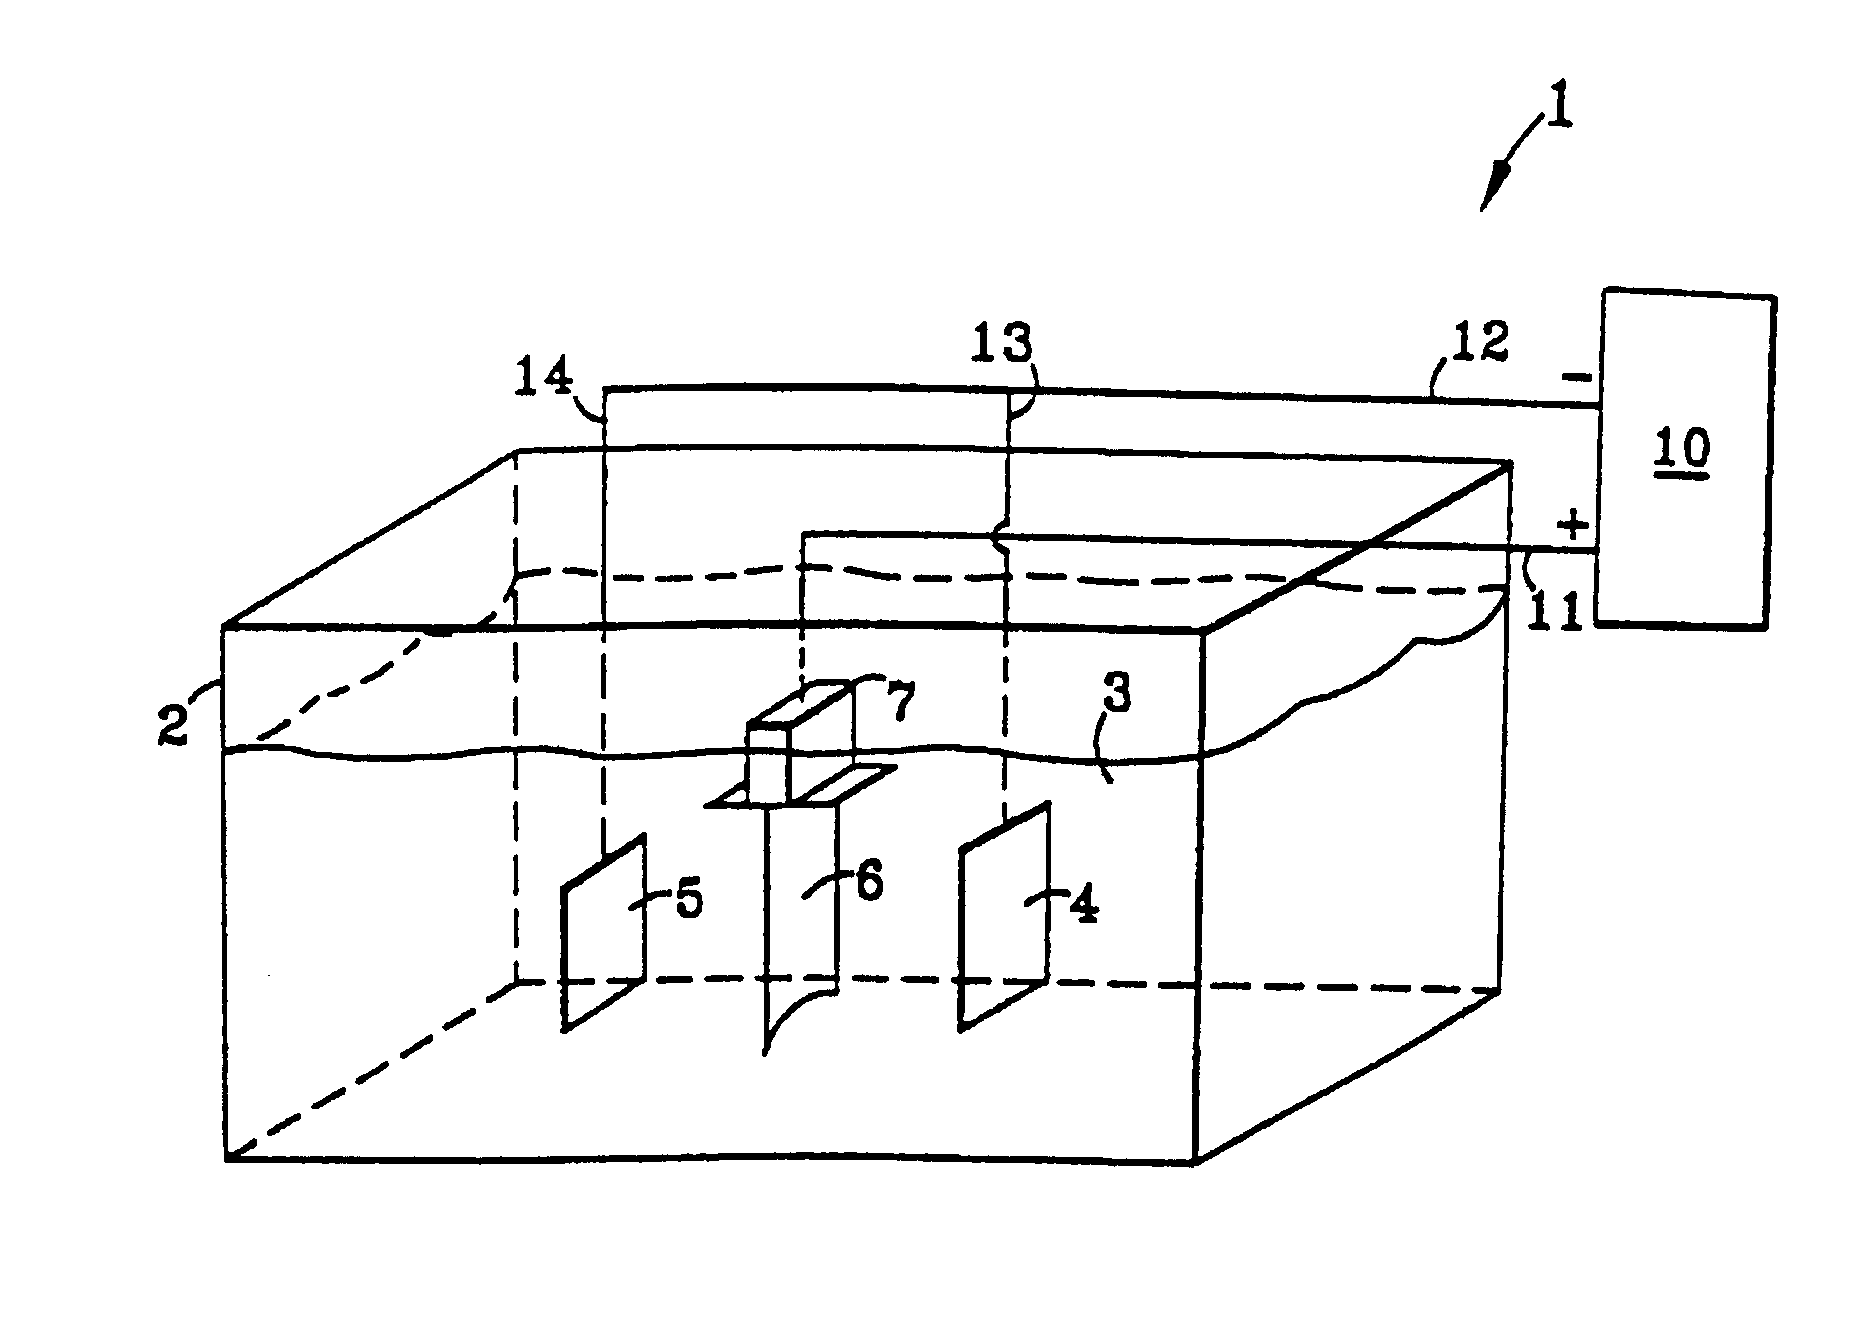 Method and apparatus for selectively removing coatings from substrates